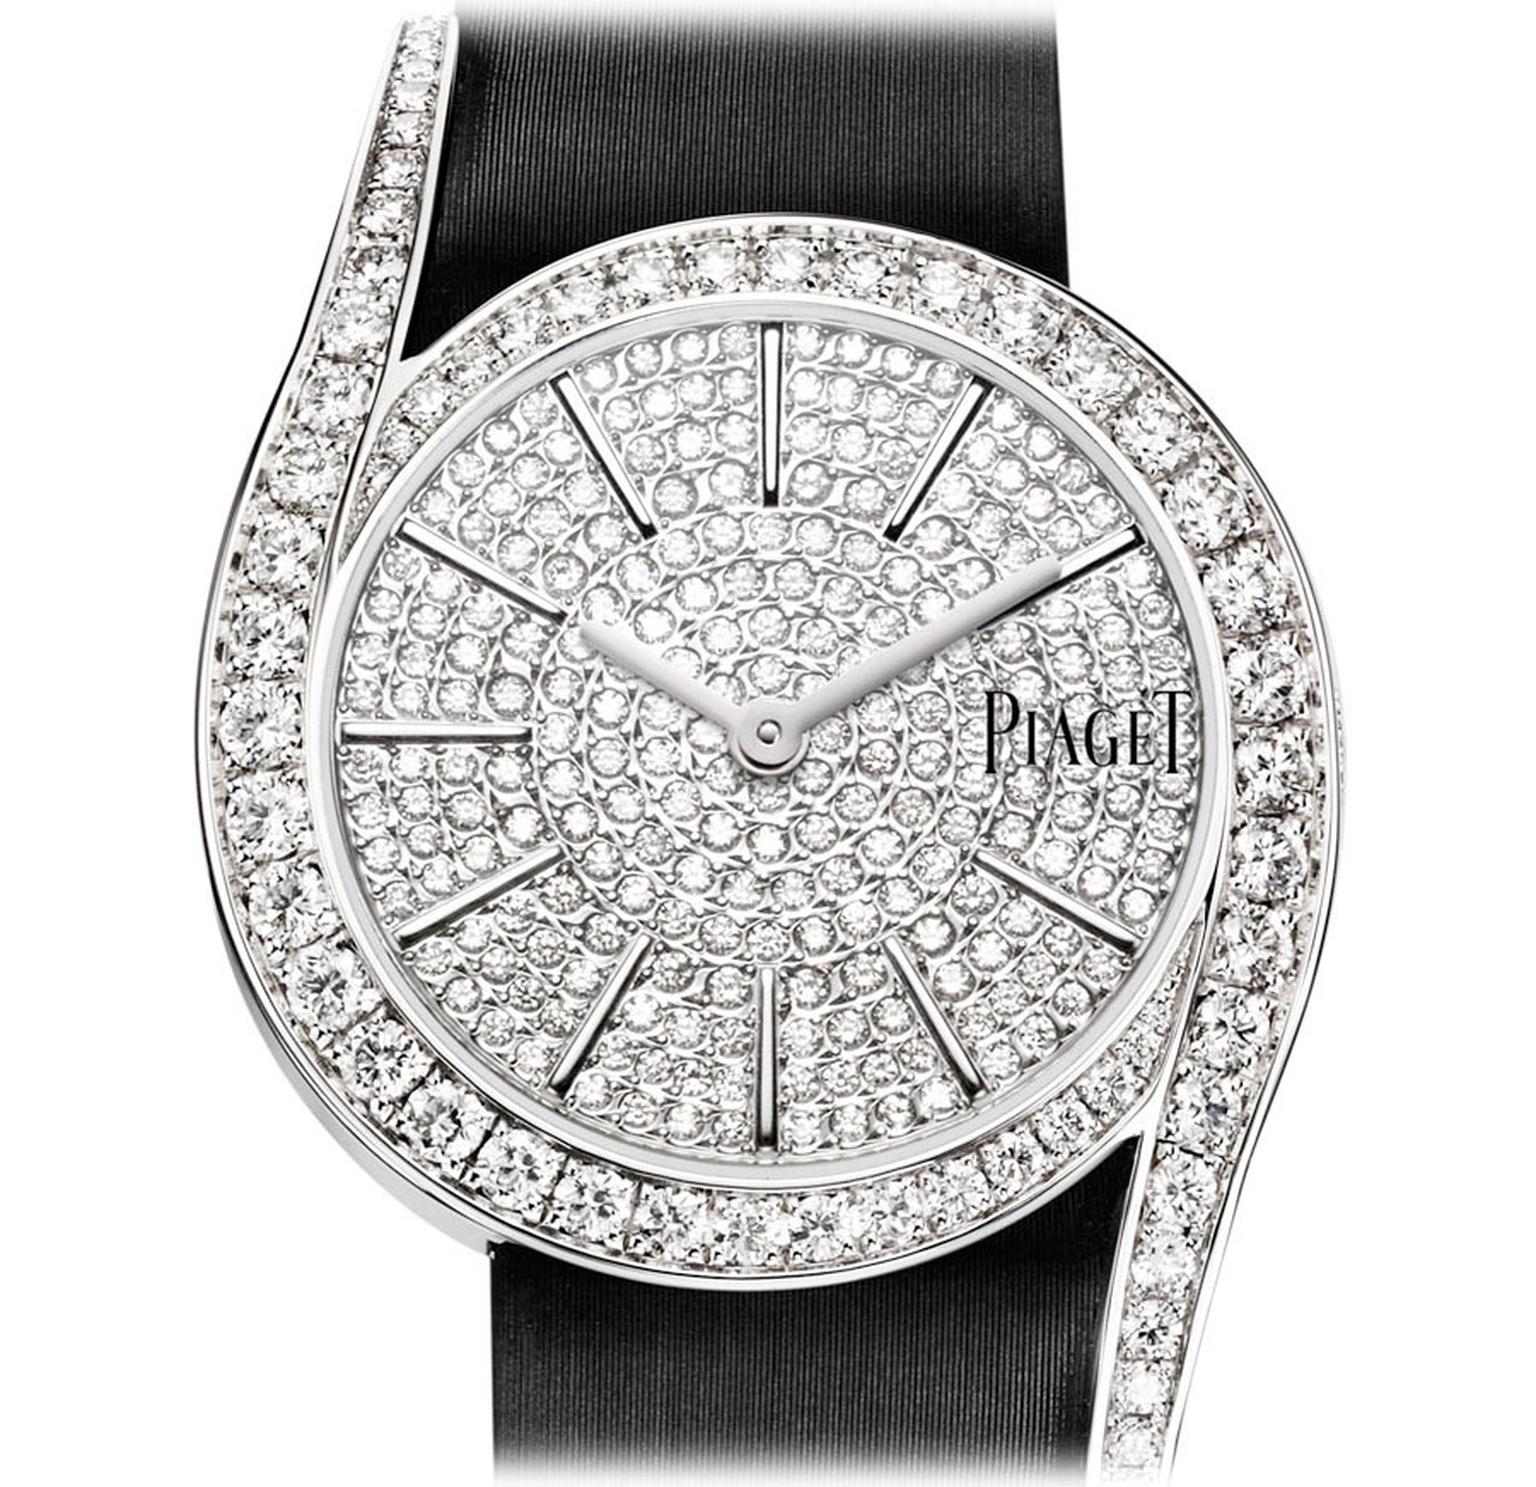 Piaget-Limelight-MAIN-PIC